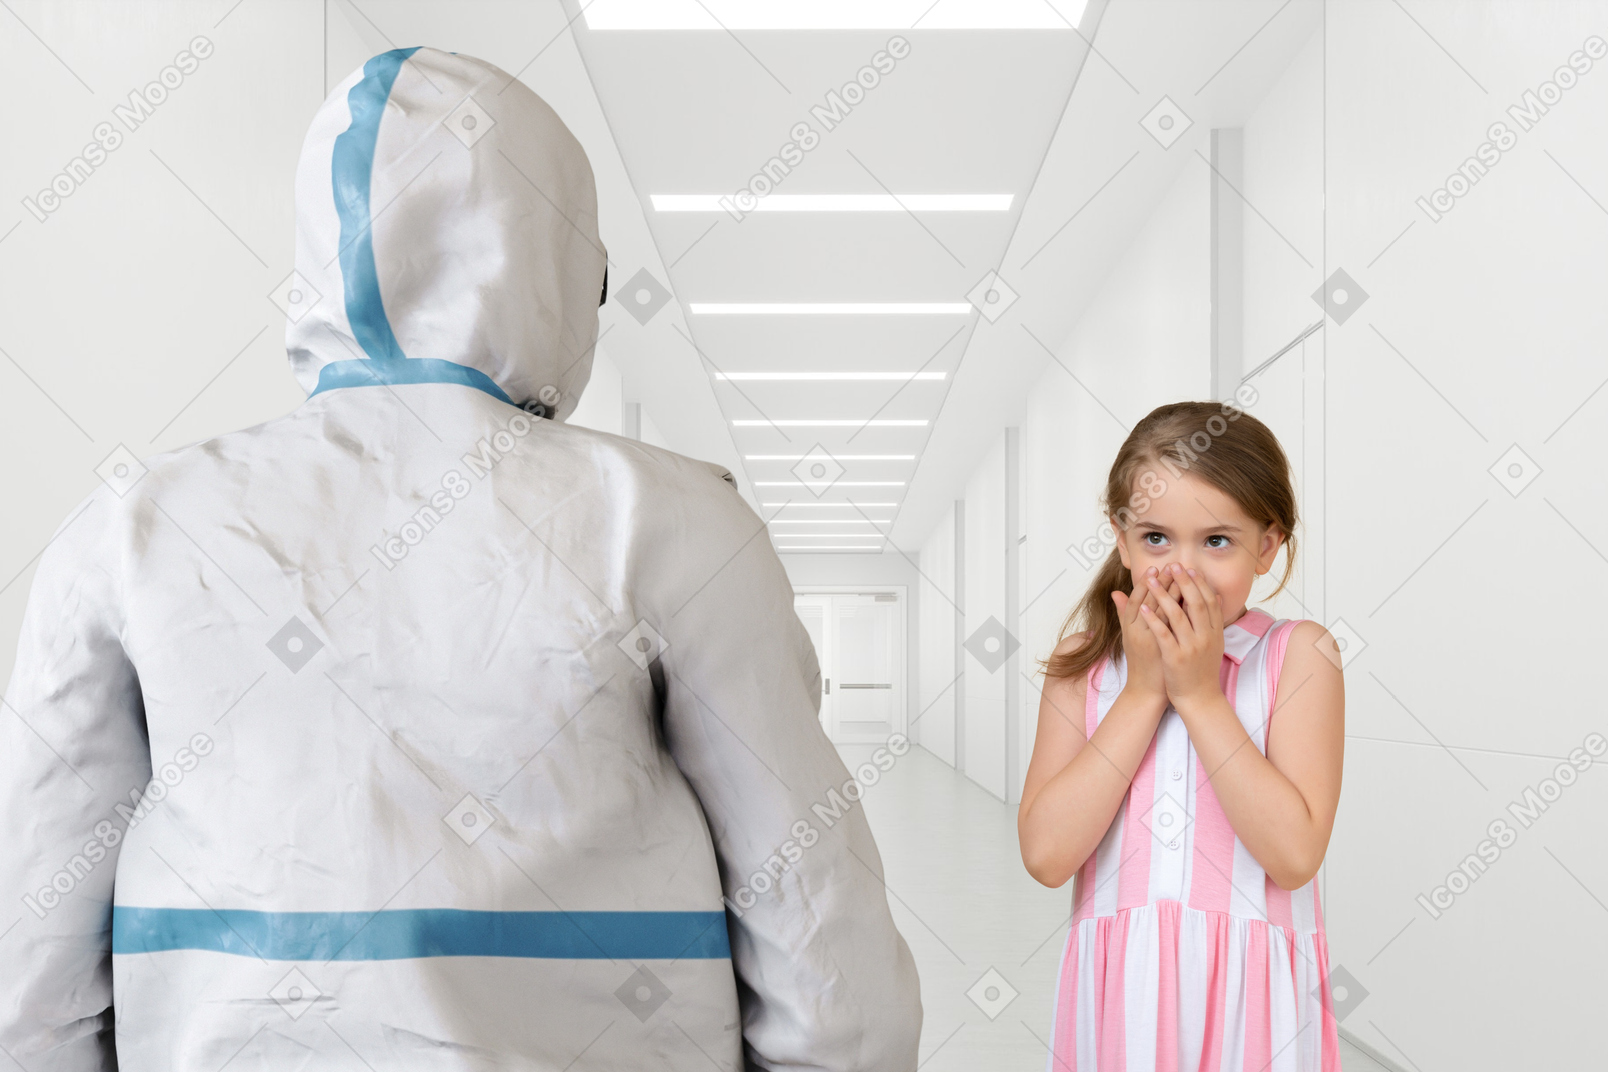 Scared girl looking at person in protective suit